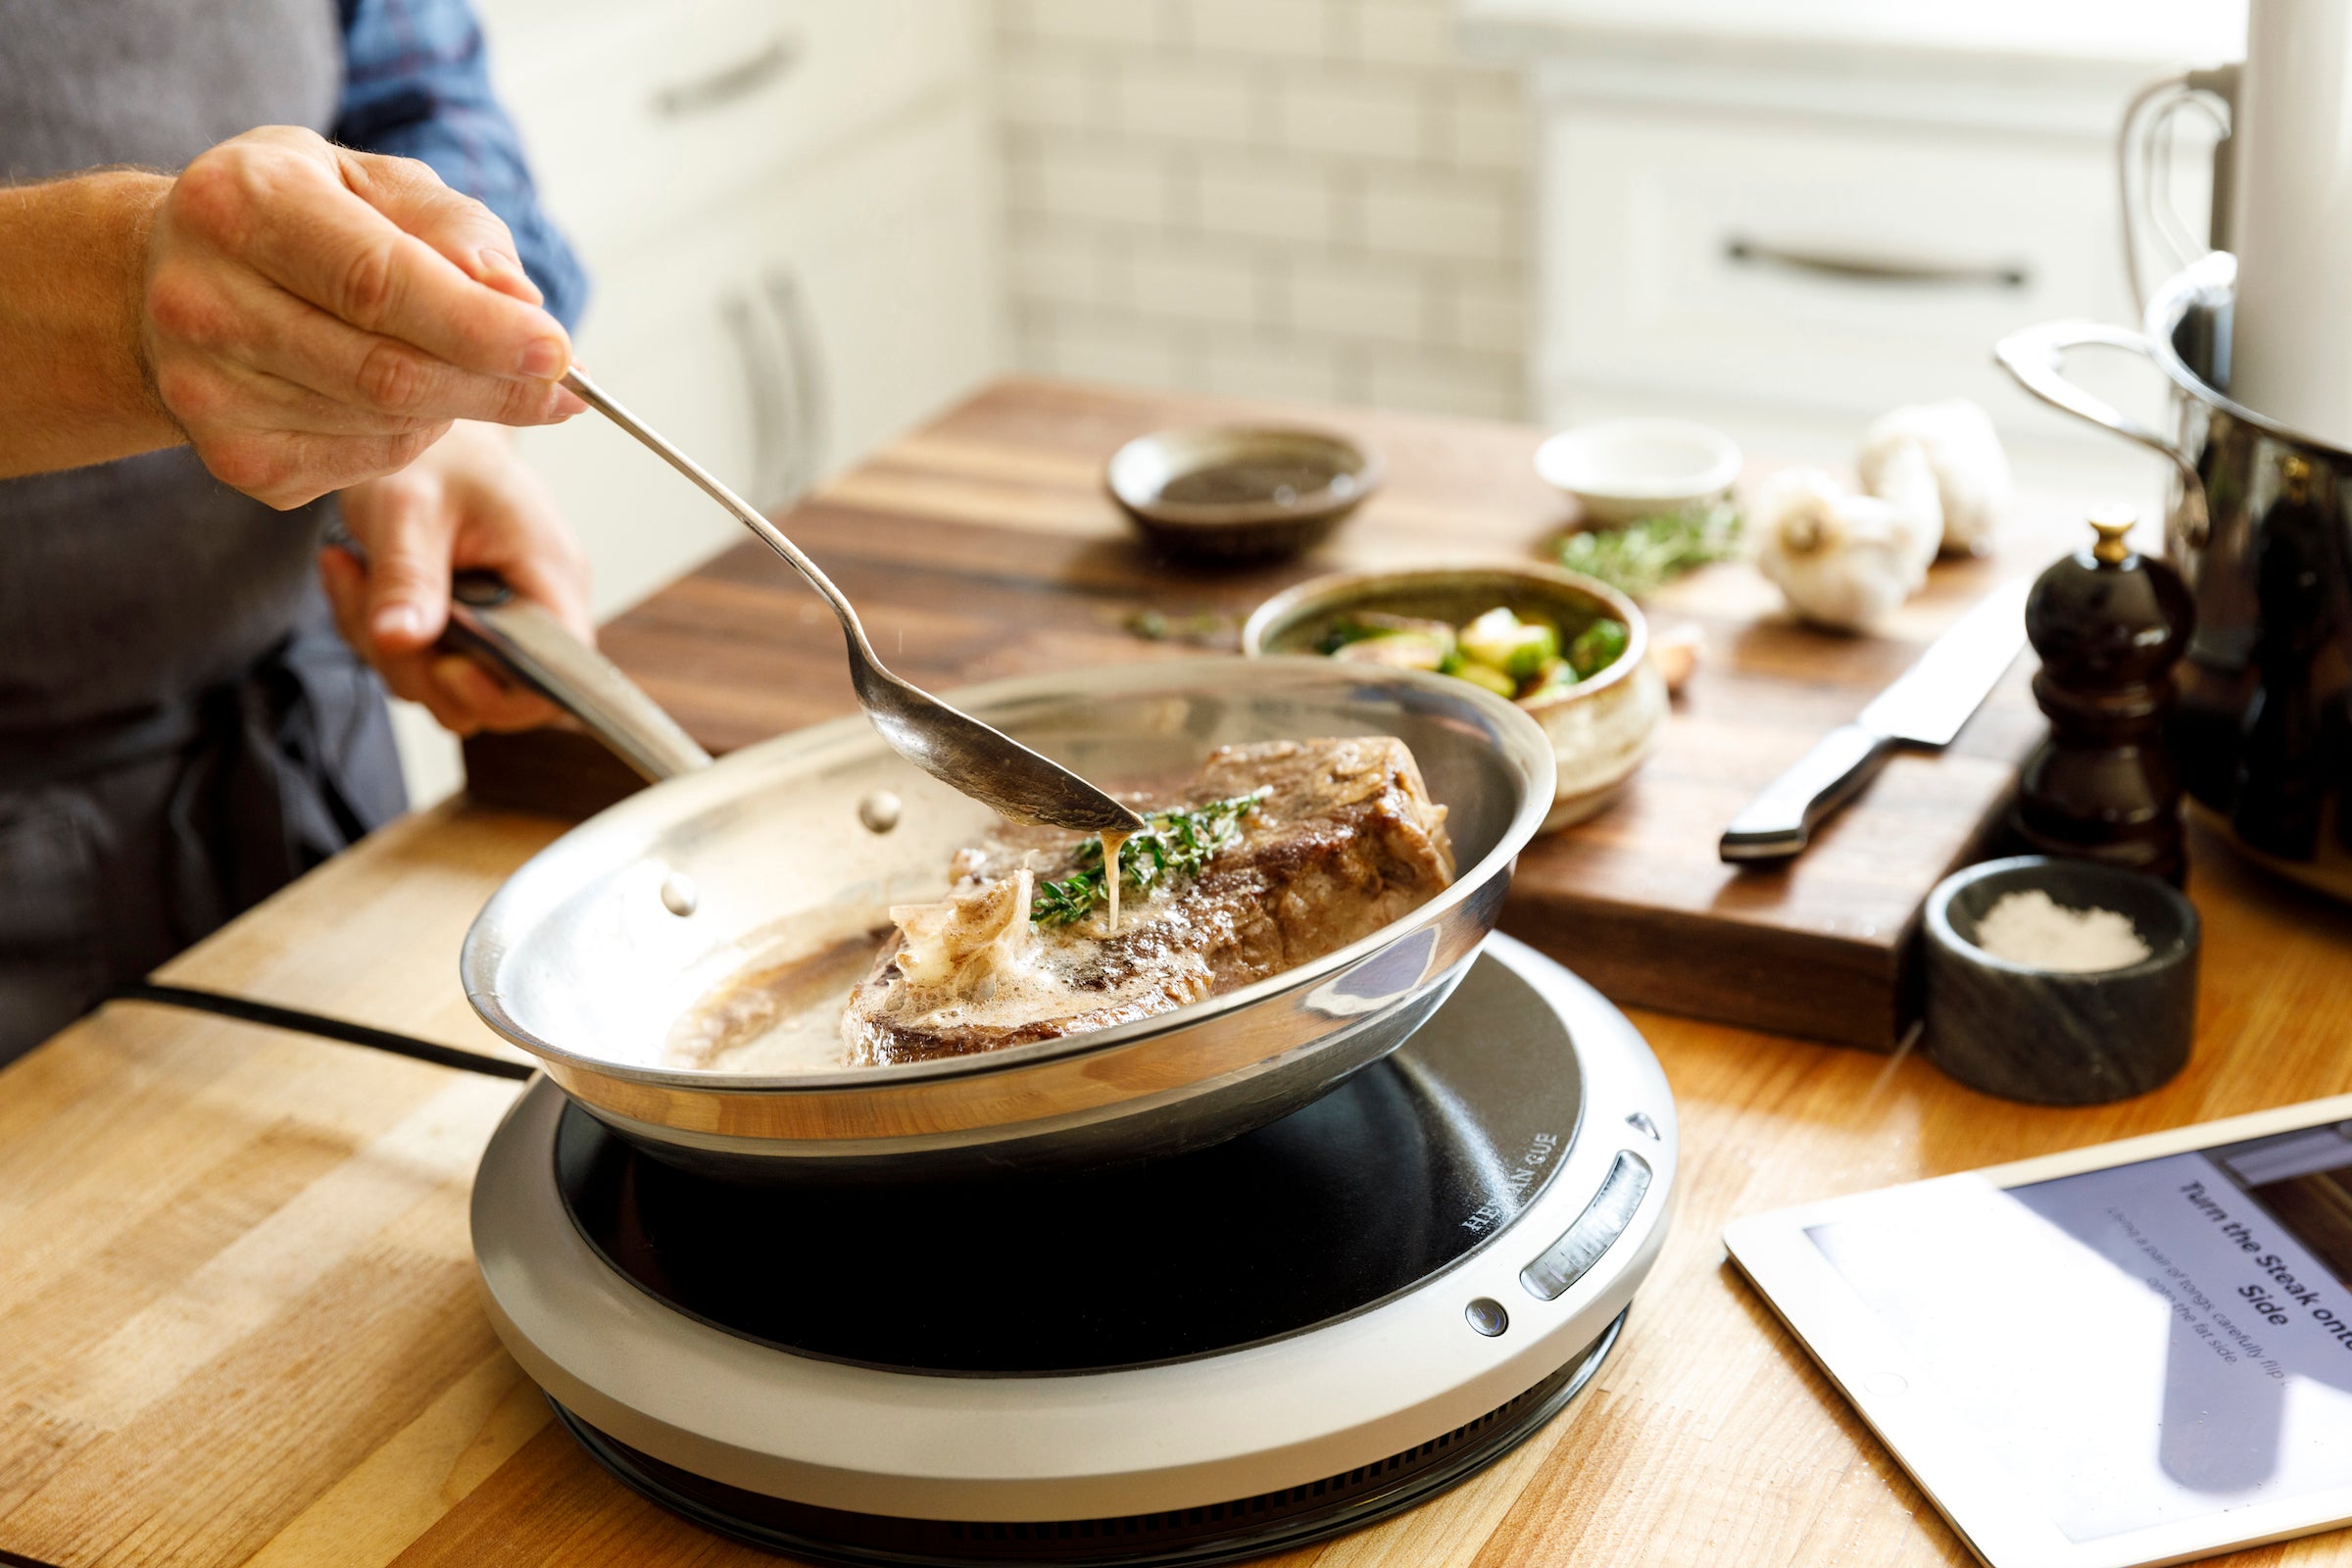 Hestan Cue Smart Cooking | Become the Master of Temperature